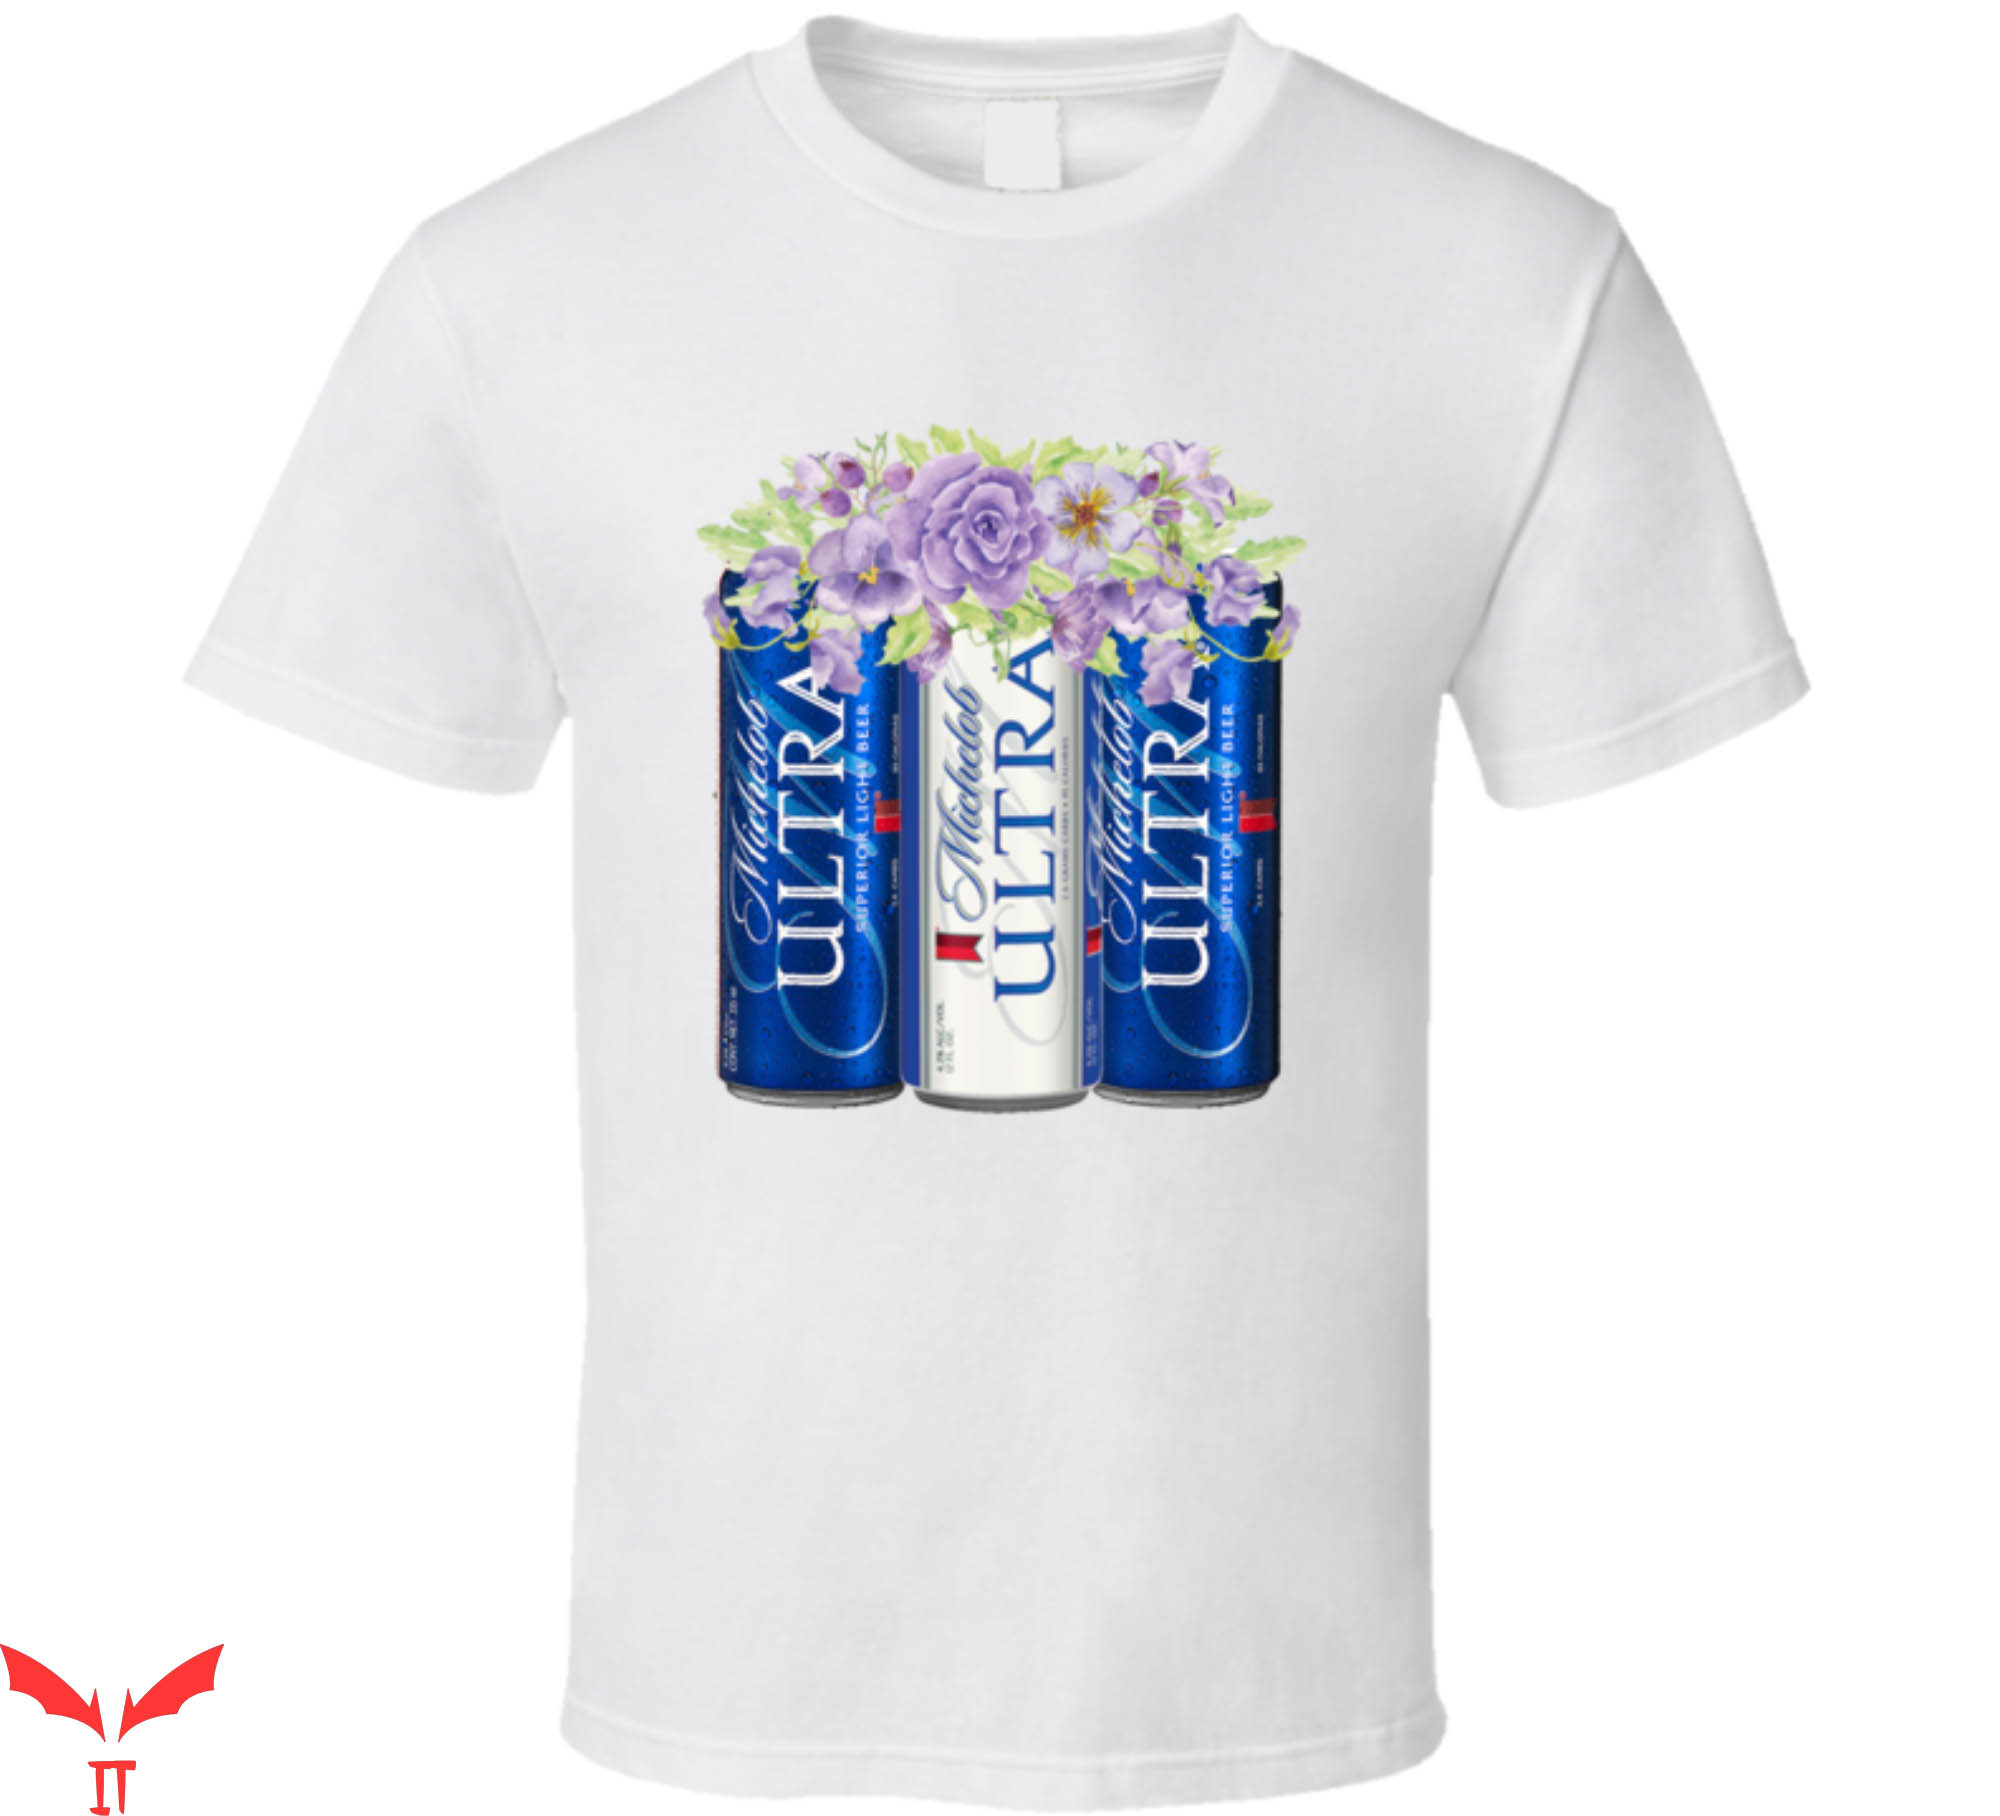 Michelob Ultra T-Shirt Three Funny Beer Cans Tee Shirt